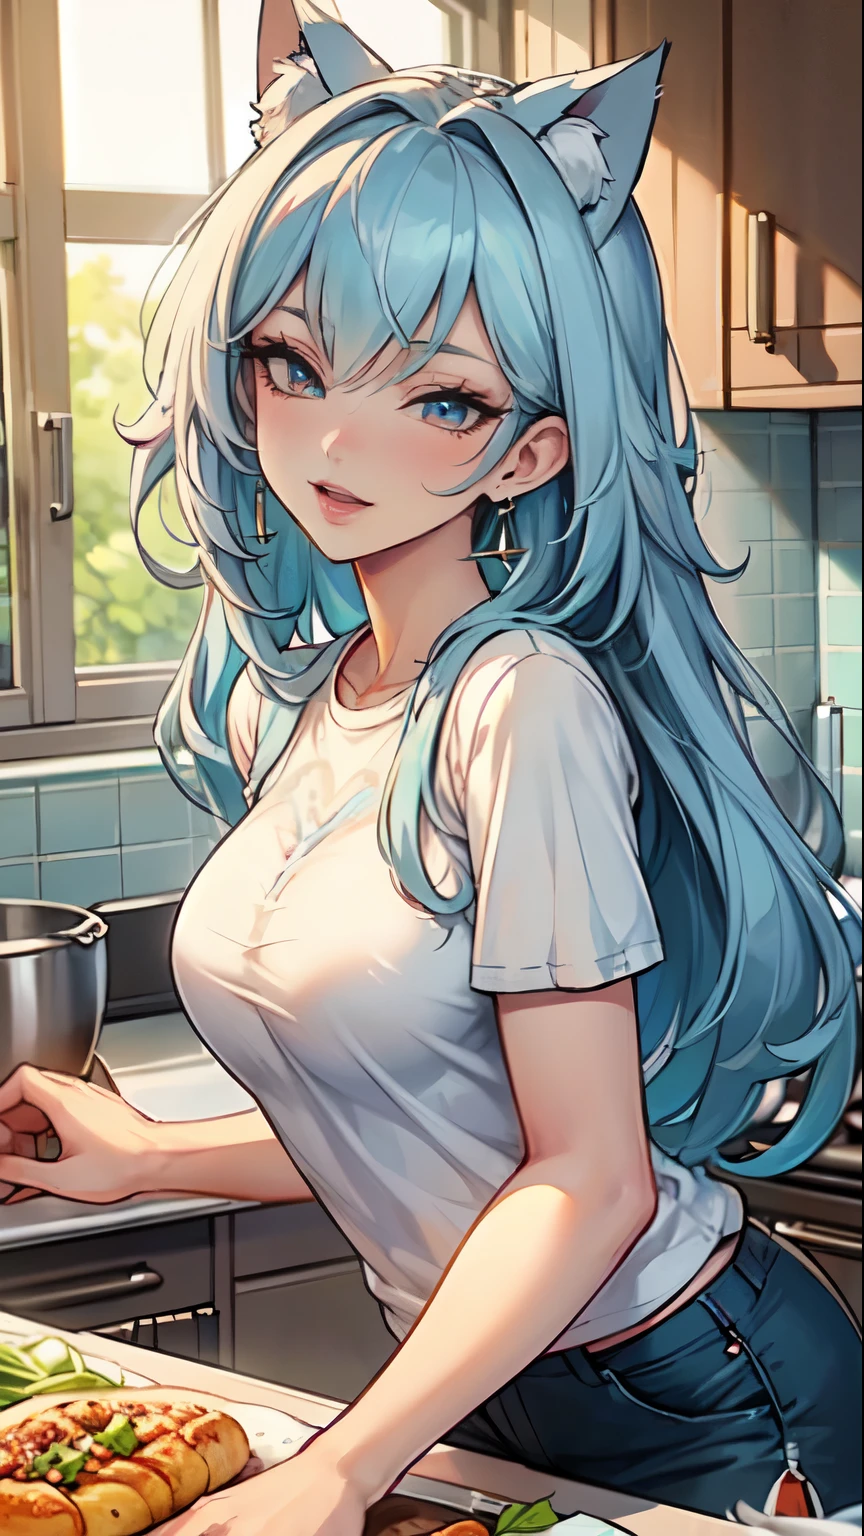 Masterpiece, beautiful art, professional artist, 8k, art style by sciamano240, very detailed face, very detailed hair, 1girl,1man, perfectly drawn body, beautiful face, long hair, light blue hair , very detailed blue vertical cat eyes, pouty lips , rosey cheeks, intricate details in eyes, wearing cozy shirt, shorts, jordans, earrings, wearing a wedding ring, in love with the viewer expression, smiling , in the kitchen cooking a meal, close up on face,